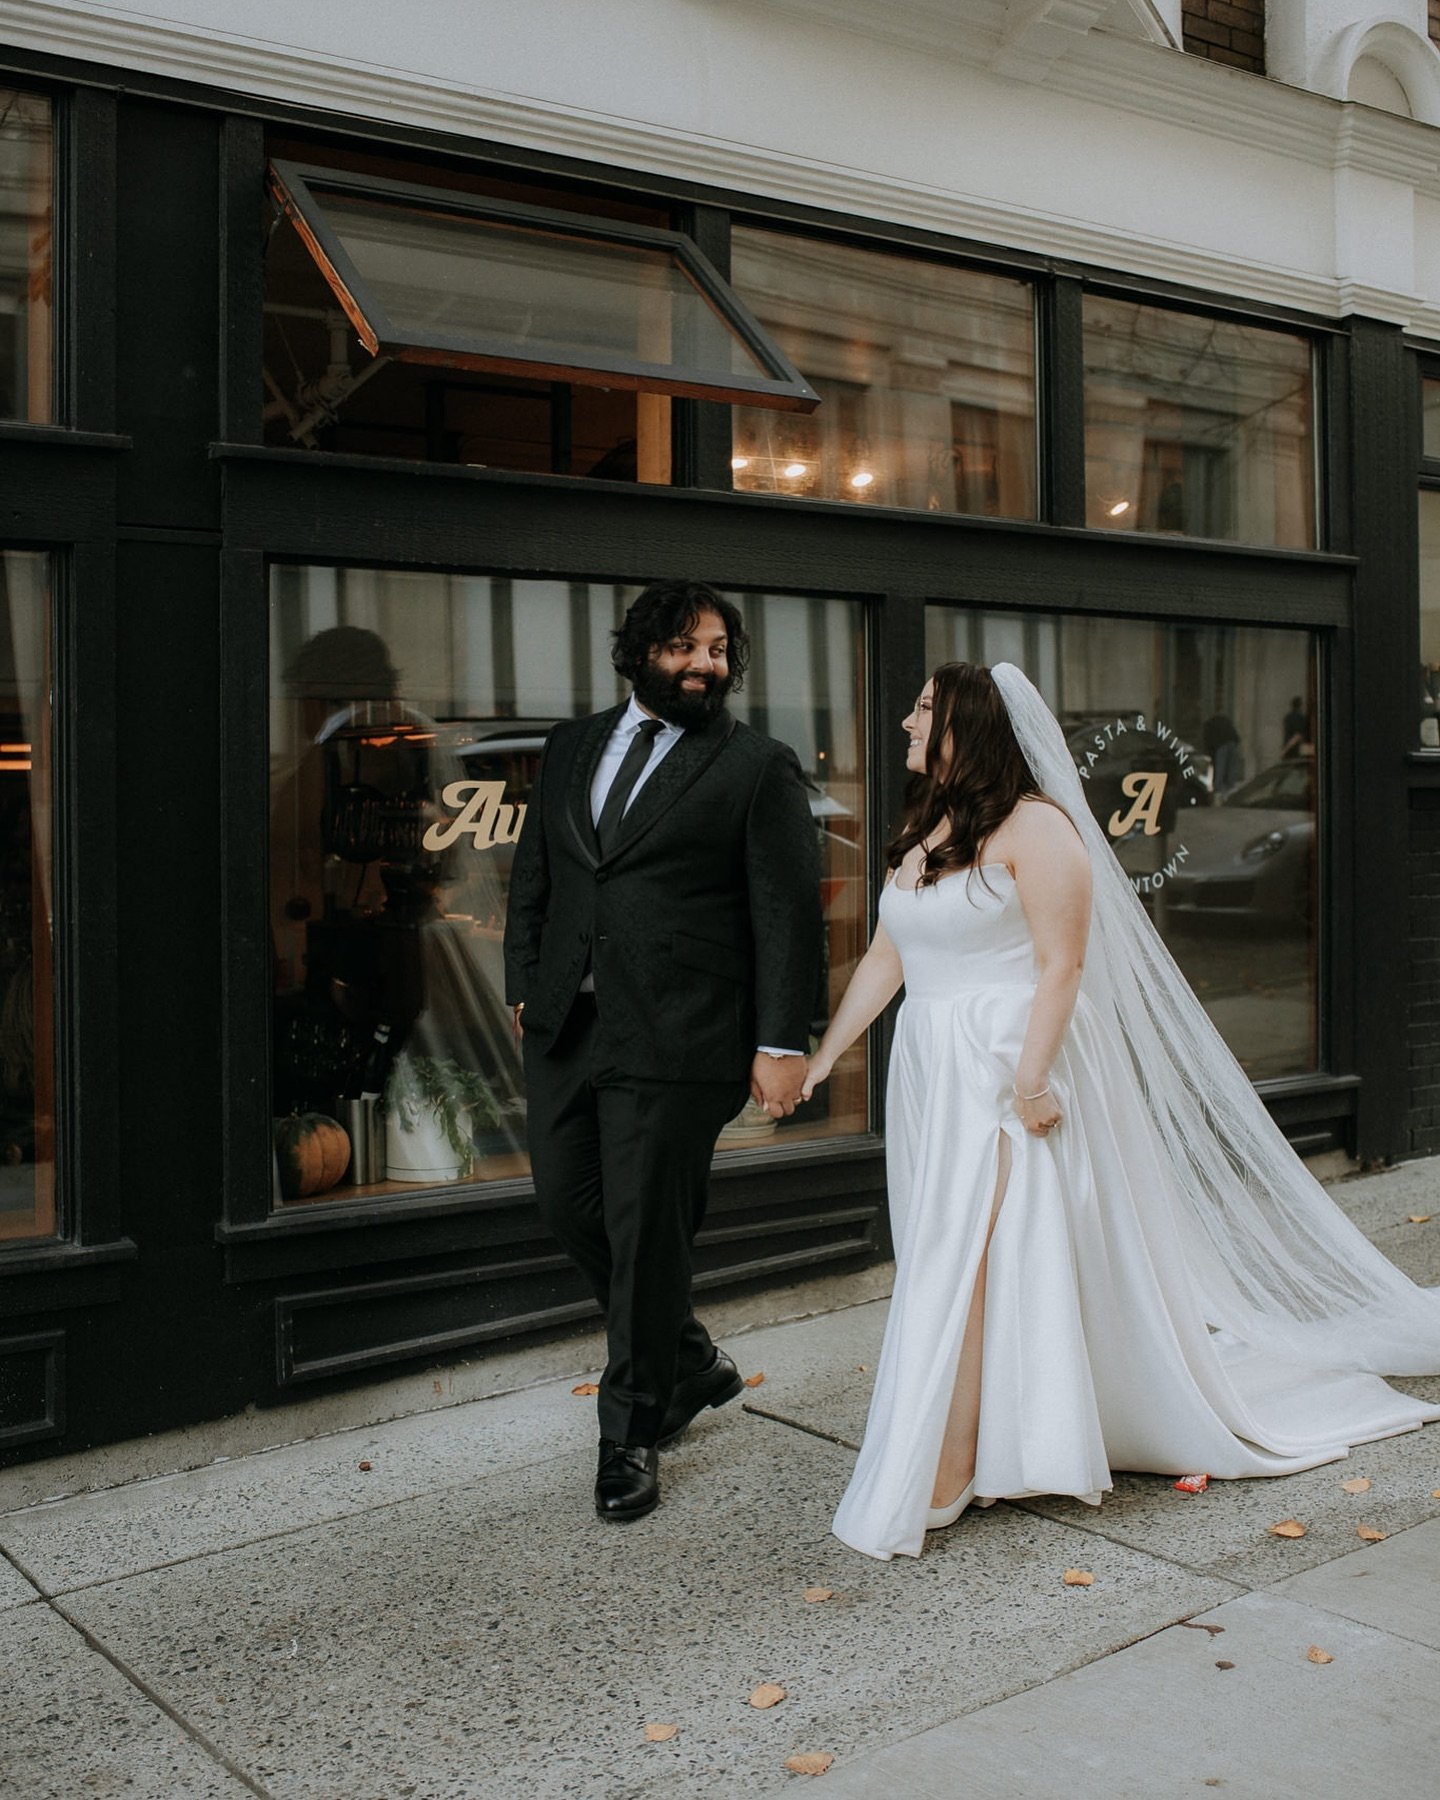 Oh Gastown, you&rsquo;re oh so great for wedding portrait backdrops! I love a good urban stroll for portraits on a wedding day 🖤🤍 

Vendor Team
Wedding Planner | @clearwater.events 
Florist | @calliaflowers 
MUA/Hair Stylist | @thelolitacollective 